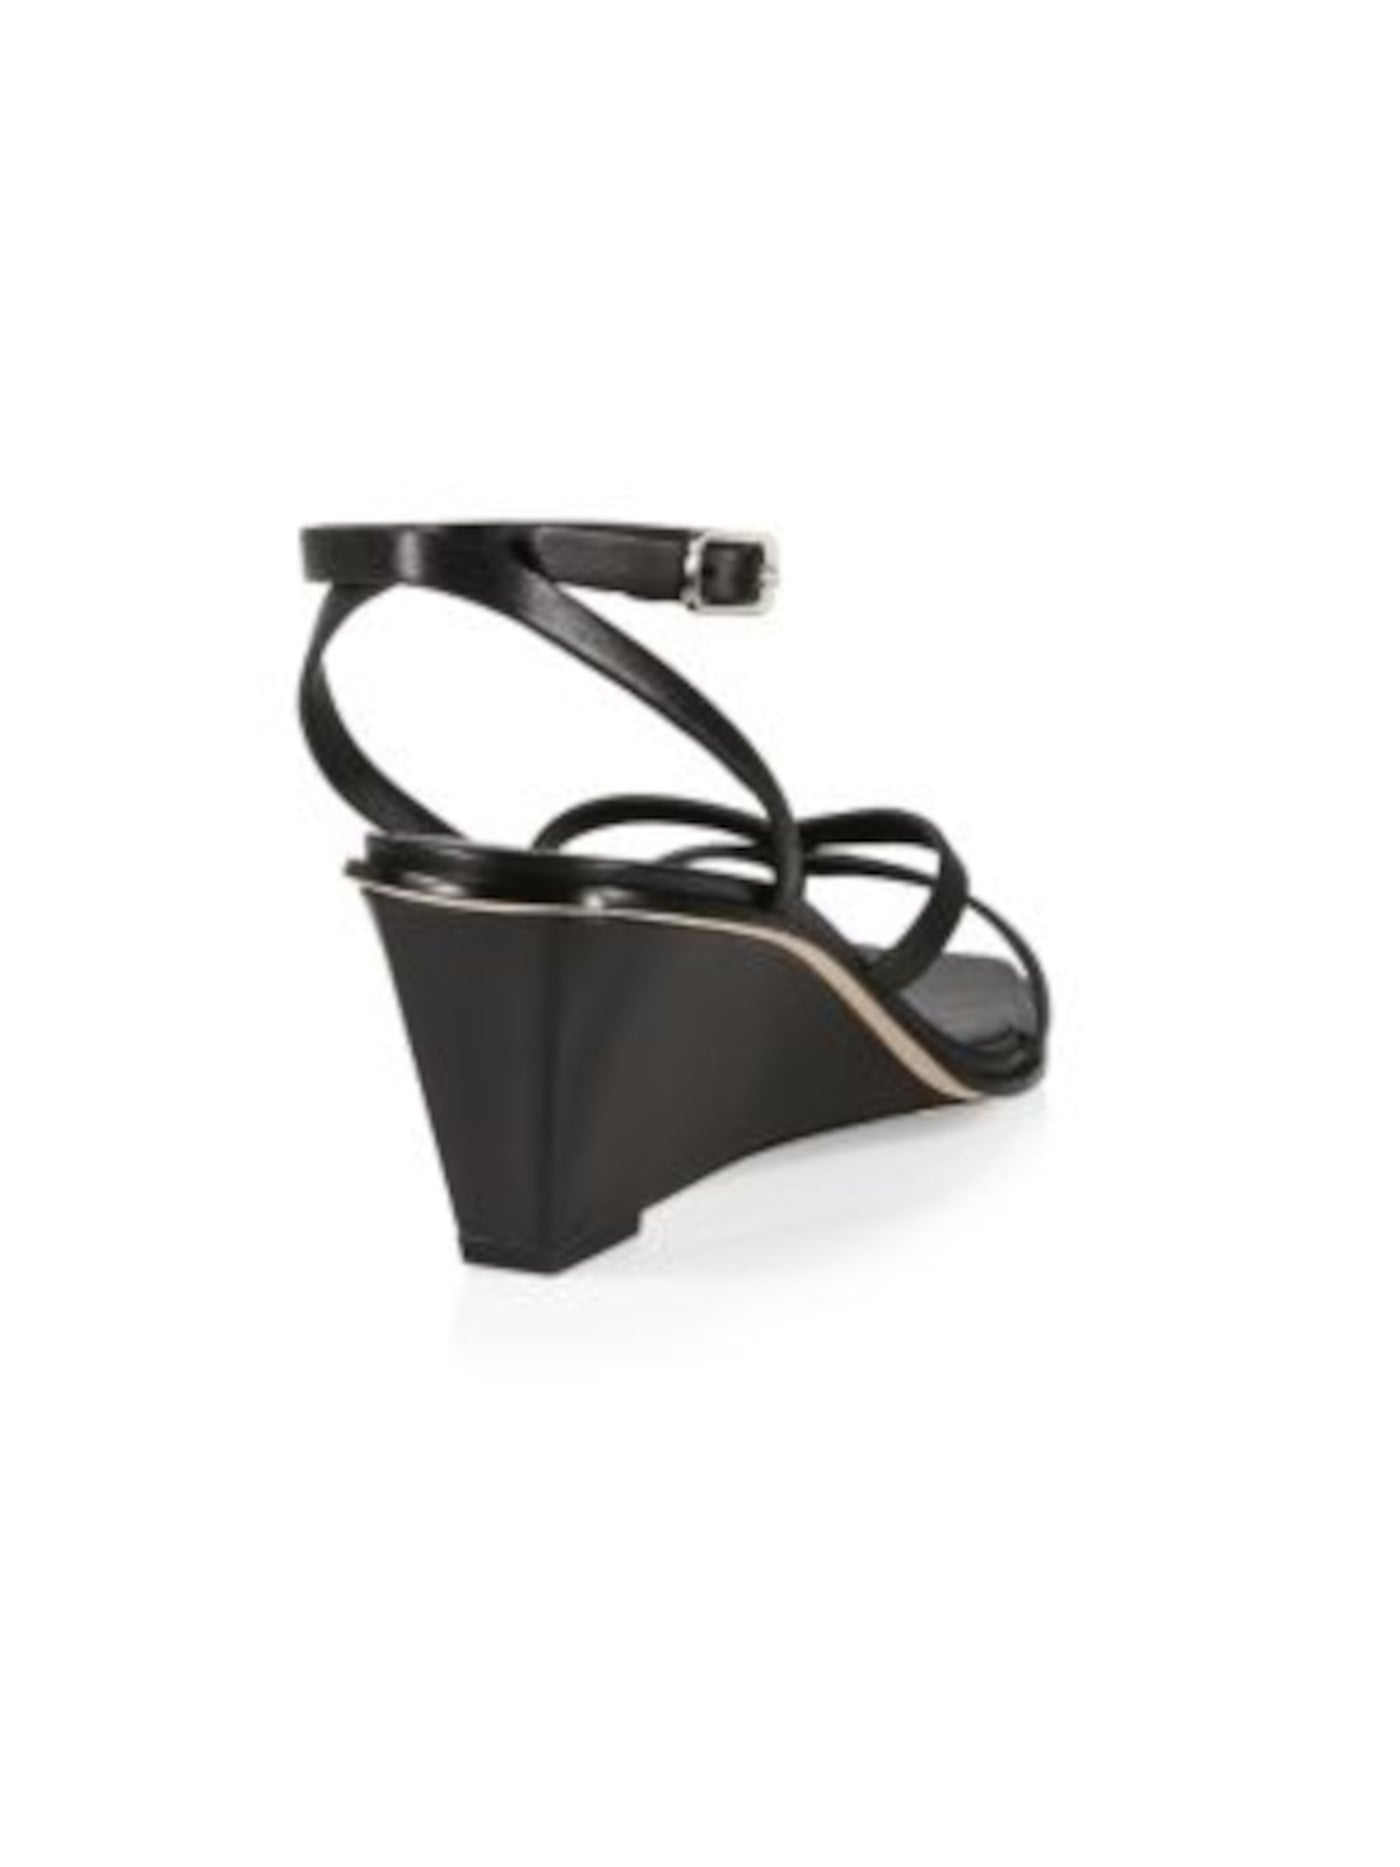 3.1 PHILLIP LIM Womens Black Strappy Crossover Ankle Strap Adjustable Strap Laura Square Toe Wedge Buckle Leather Dress Sandals Shoes 39